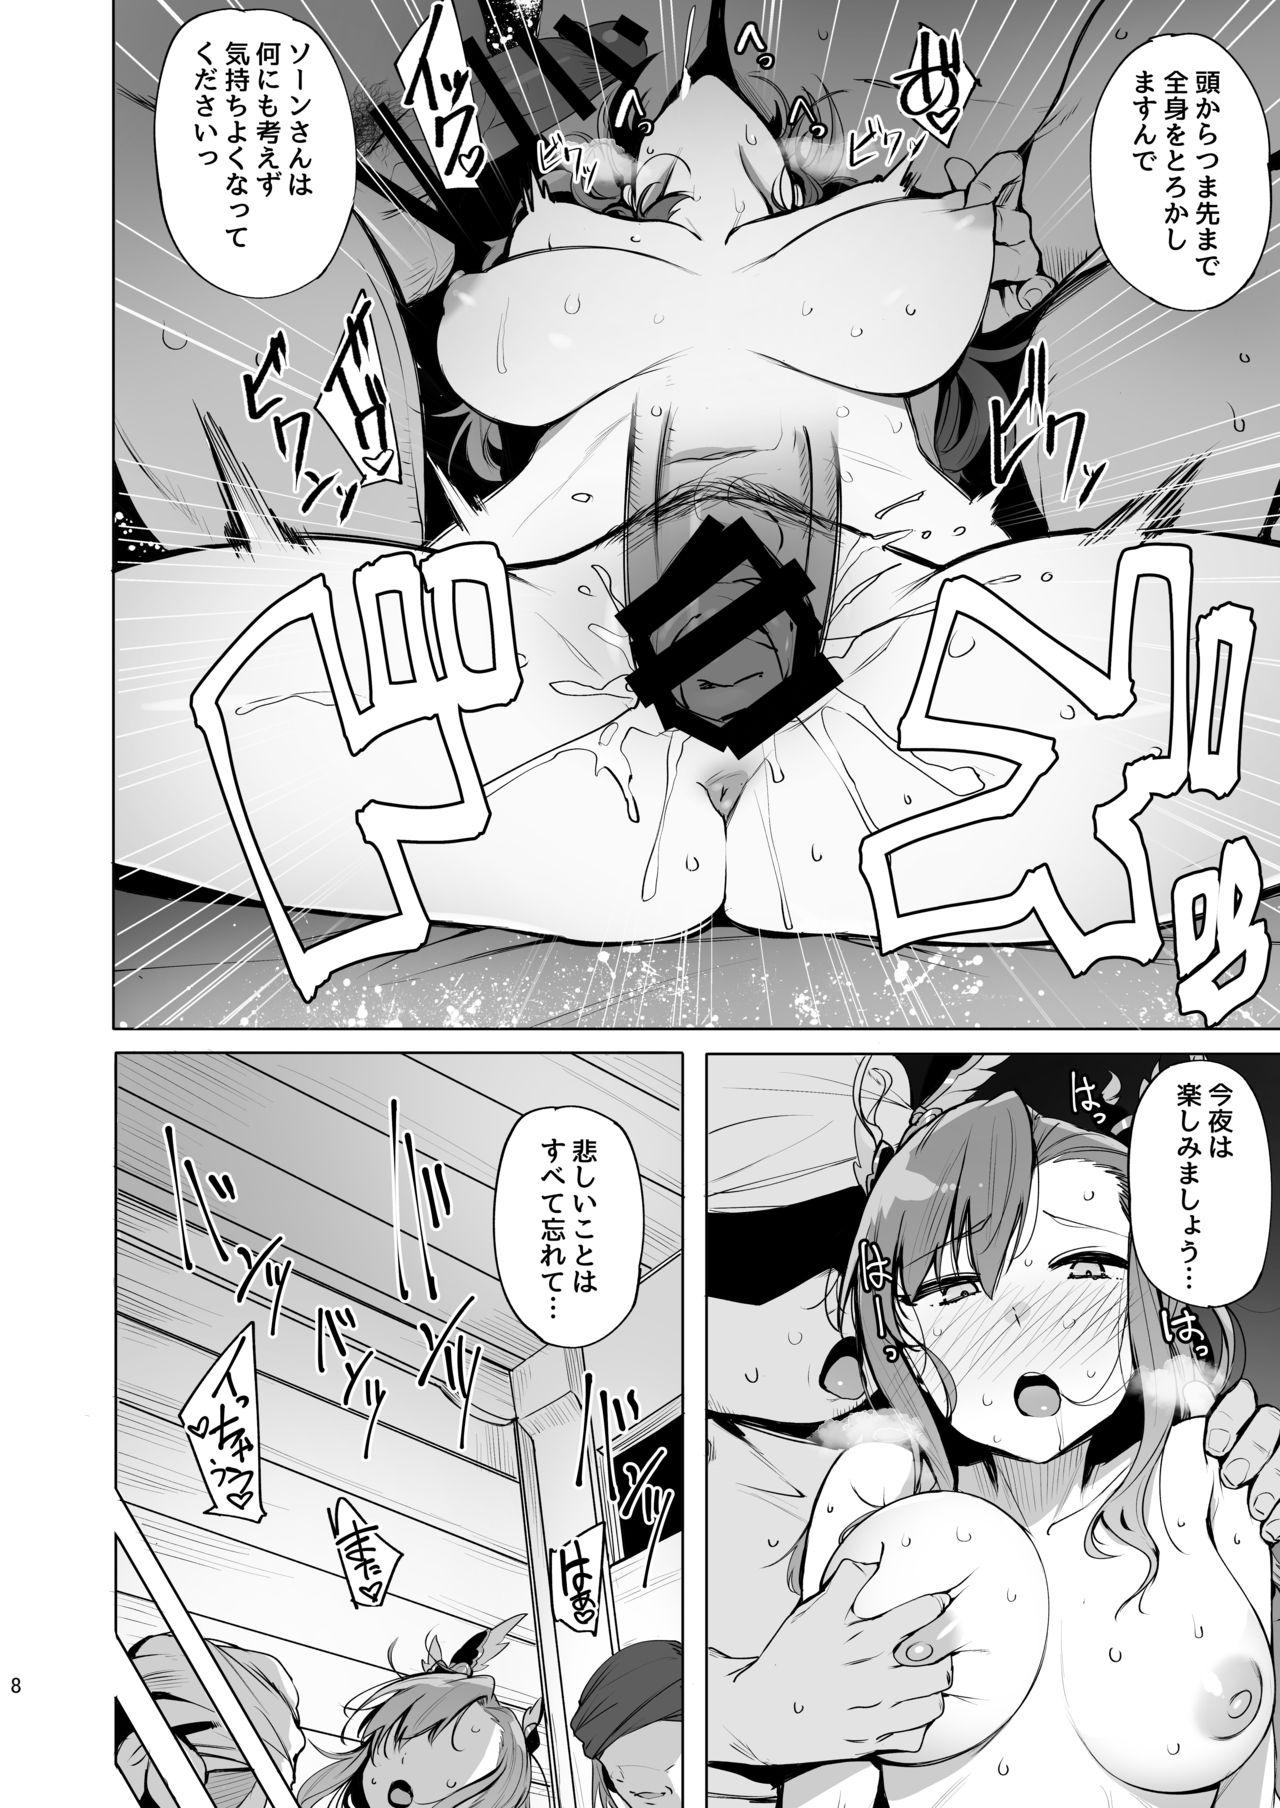 Farting Deep in the eyes - Granblue fantasy Stripping - Page 8